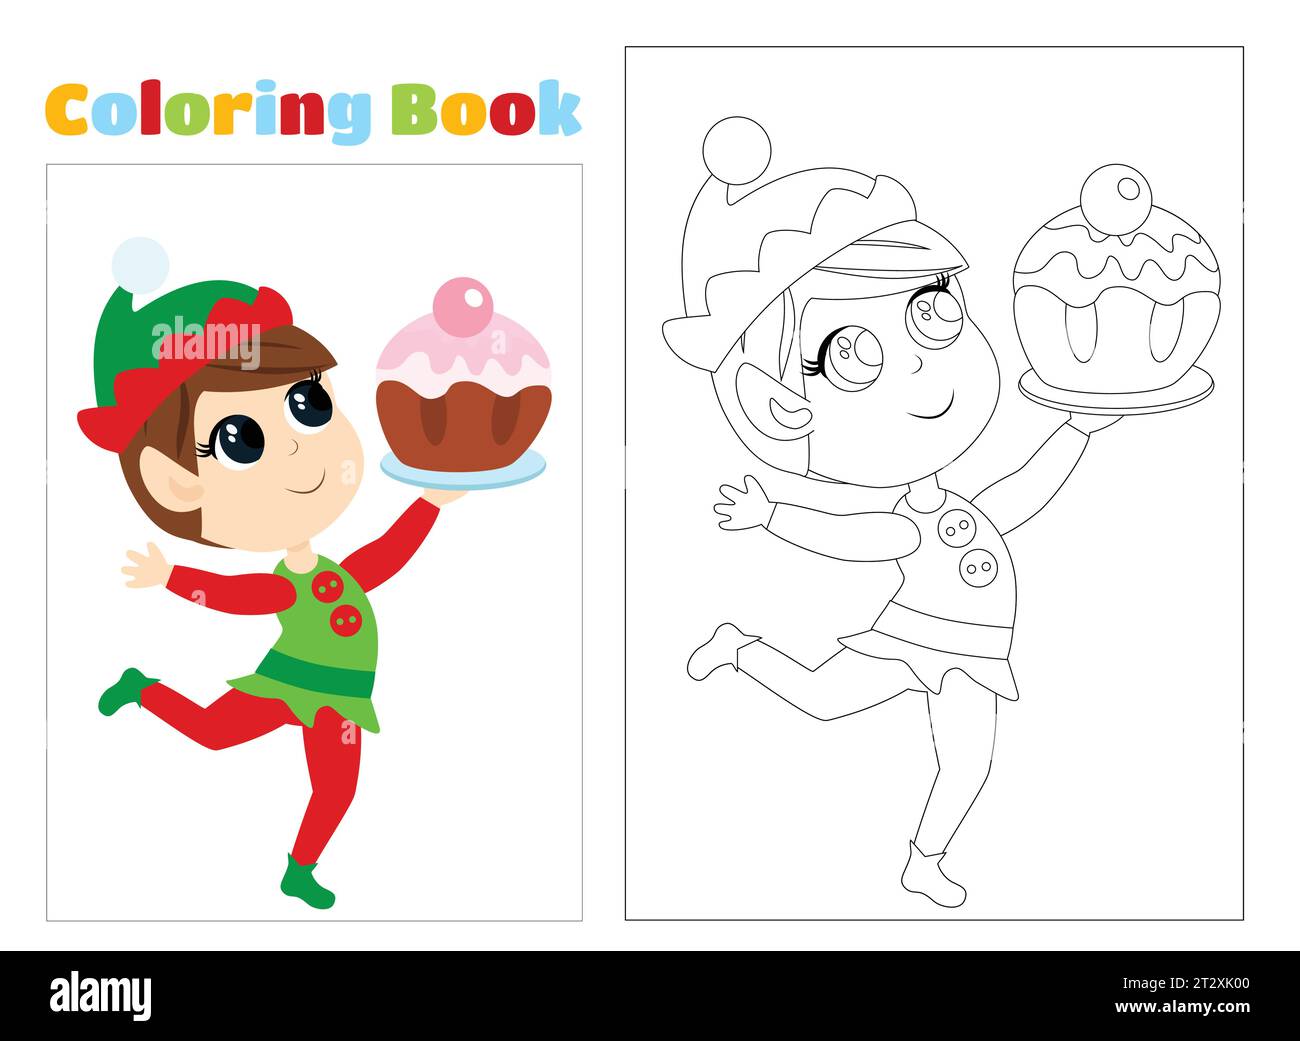 Coloring page. The elf runs and scatters the stars. The child is happy and smiling. The boy is wearing green elf clothes. Stock Vector